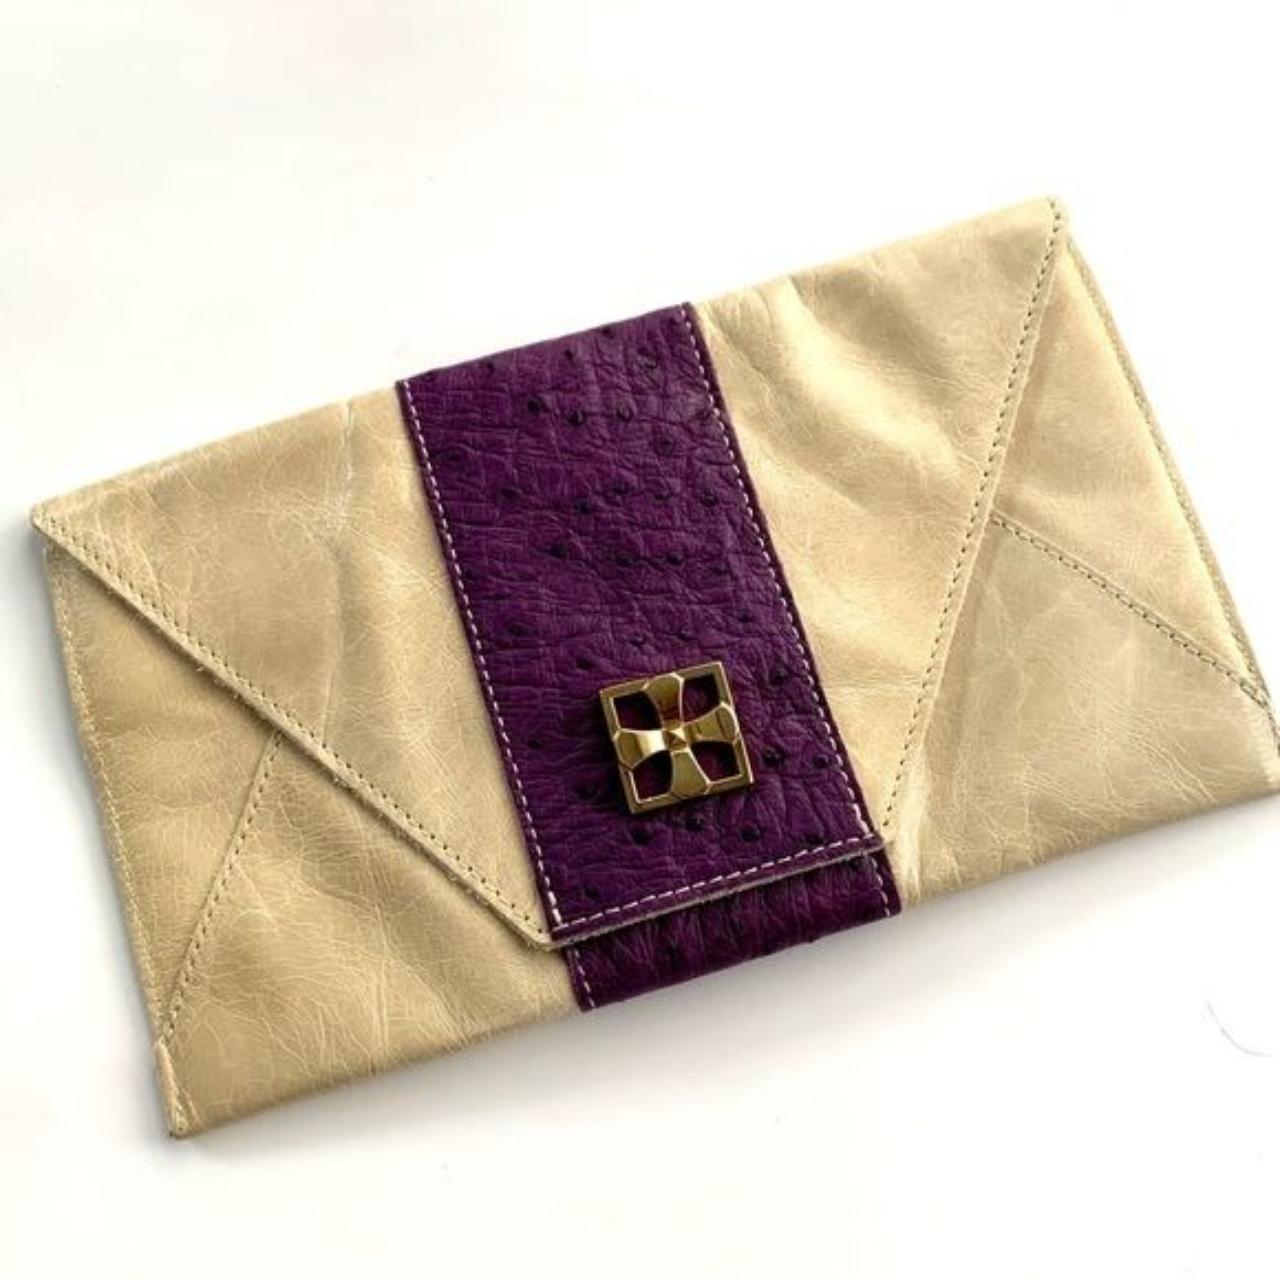 Product Image 1 - Post- Luxury Accessories Leather Clutch

Soft